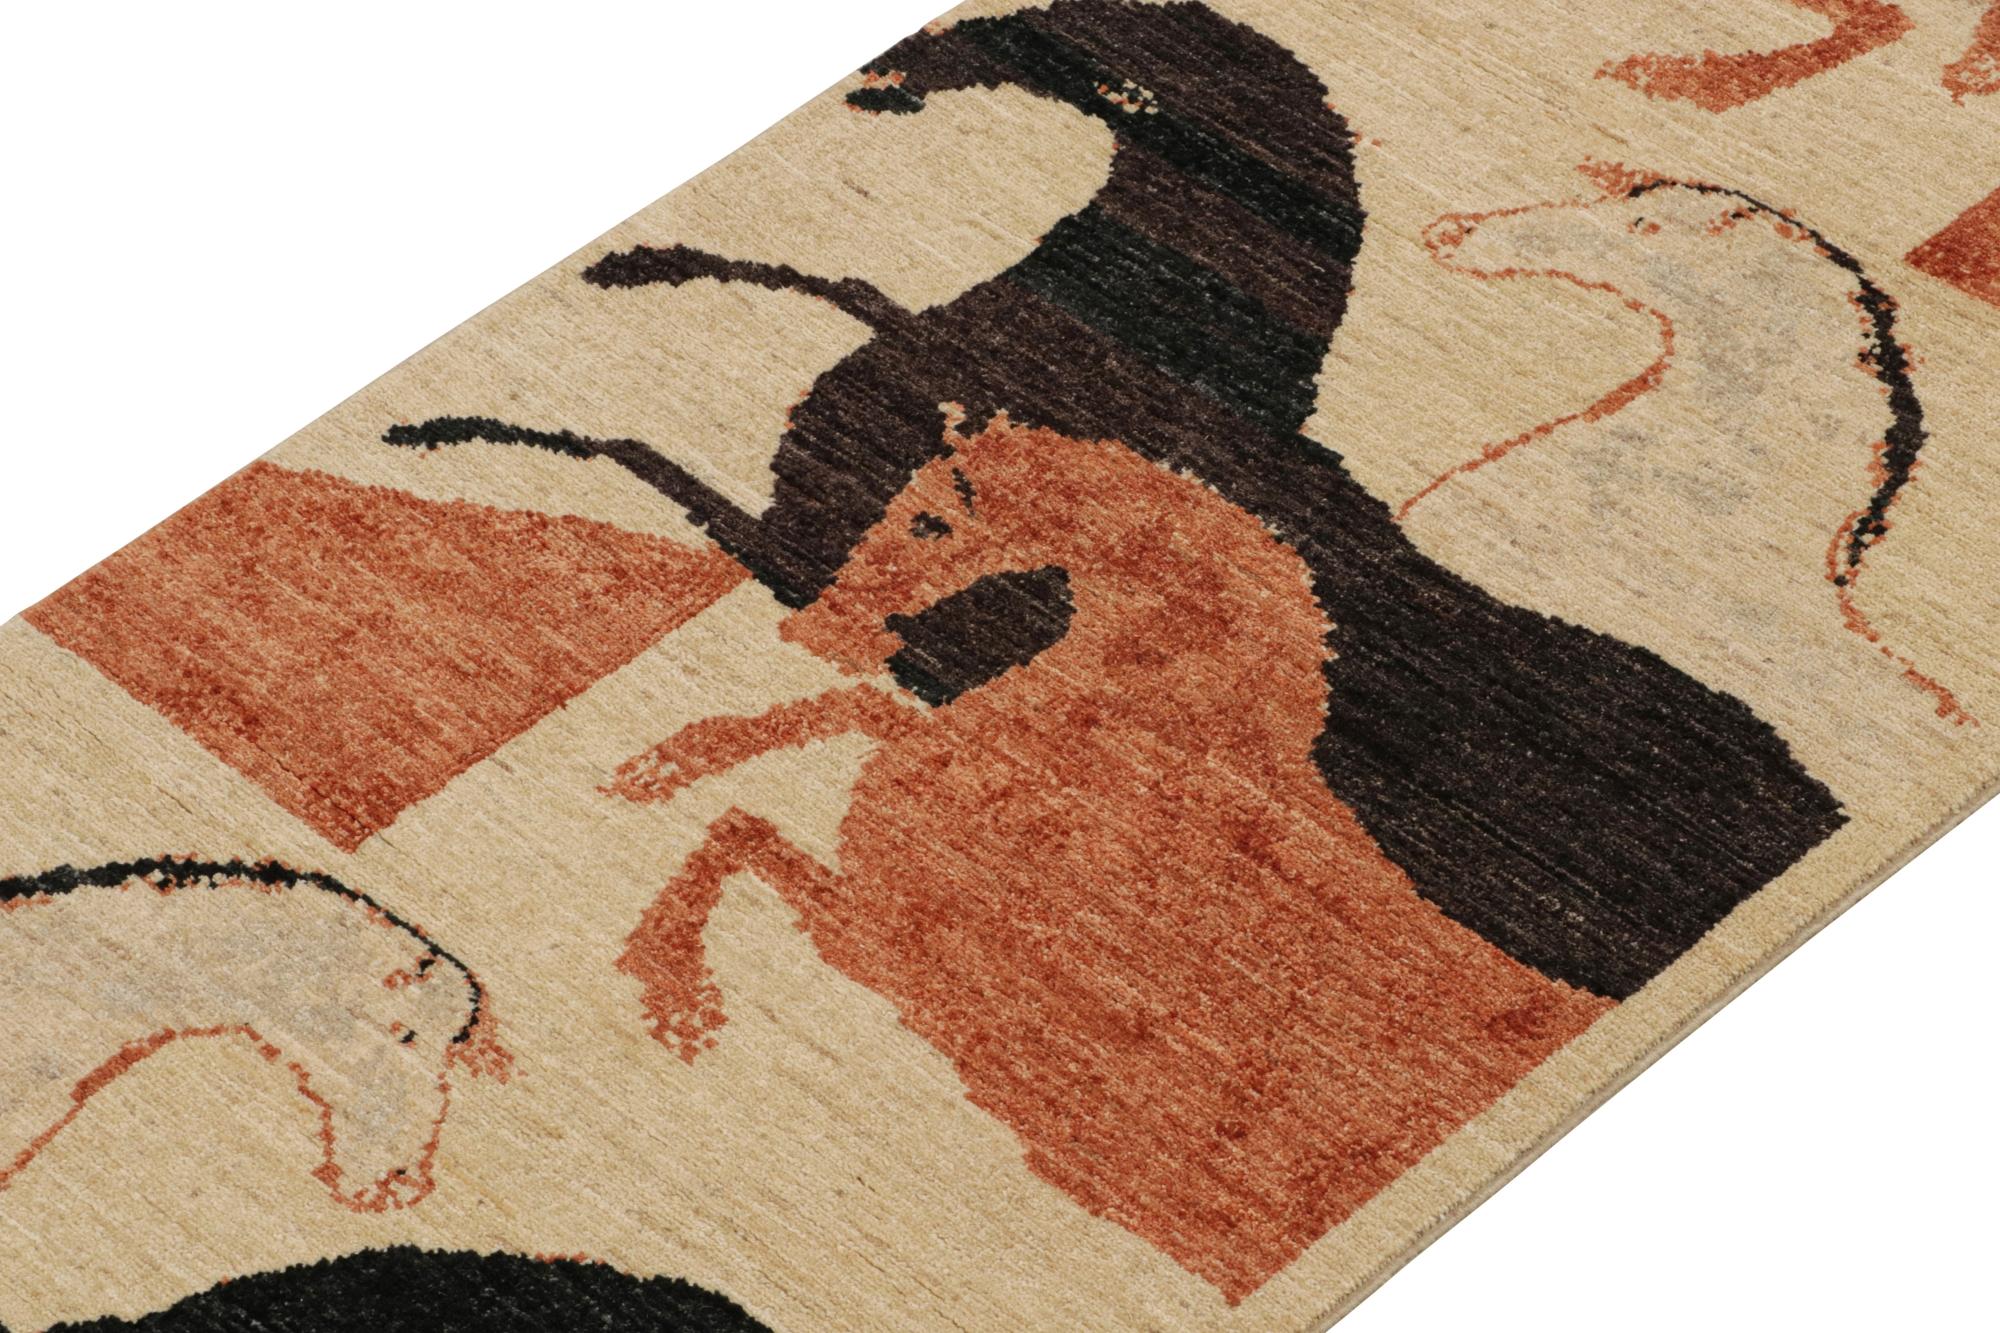 This new addition to Rug & Kilim’s Modern Classics collection is a 3x10 pictorial runner—a contemporary resurrection of one of the most collectible primitivist styles. 

Further on the Design:

Hand-knotted in wool, this piece is inspired by Gabbeh